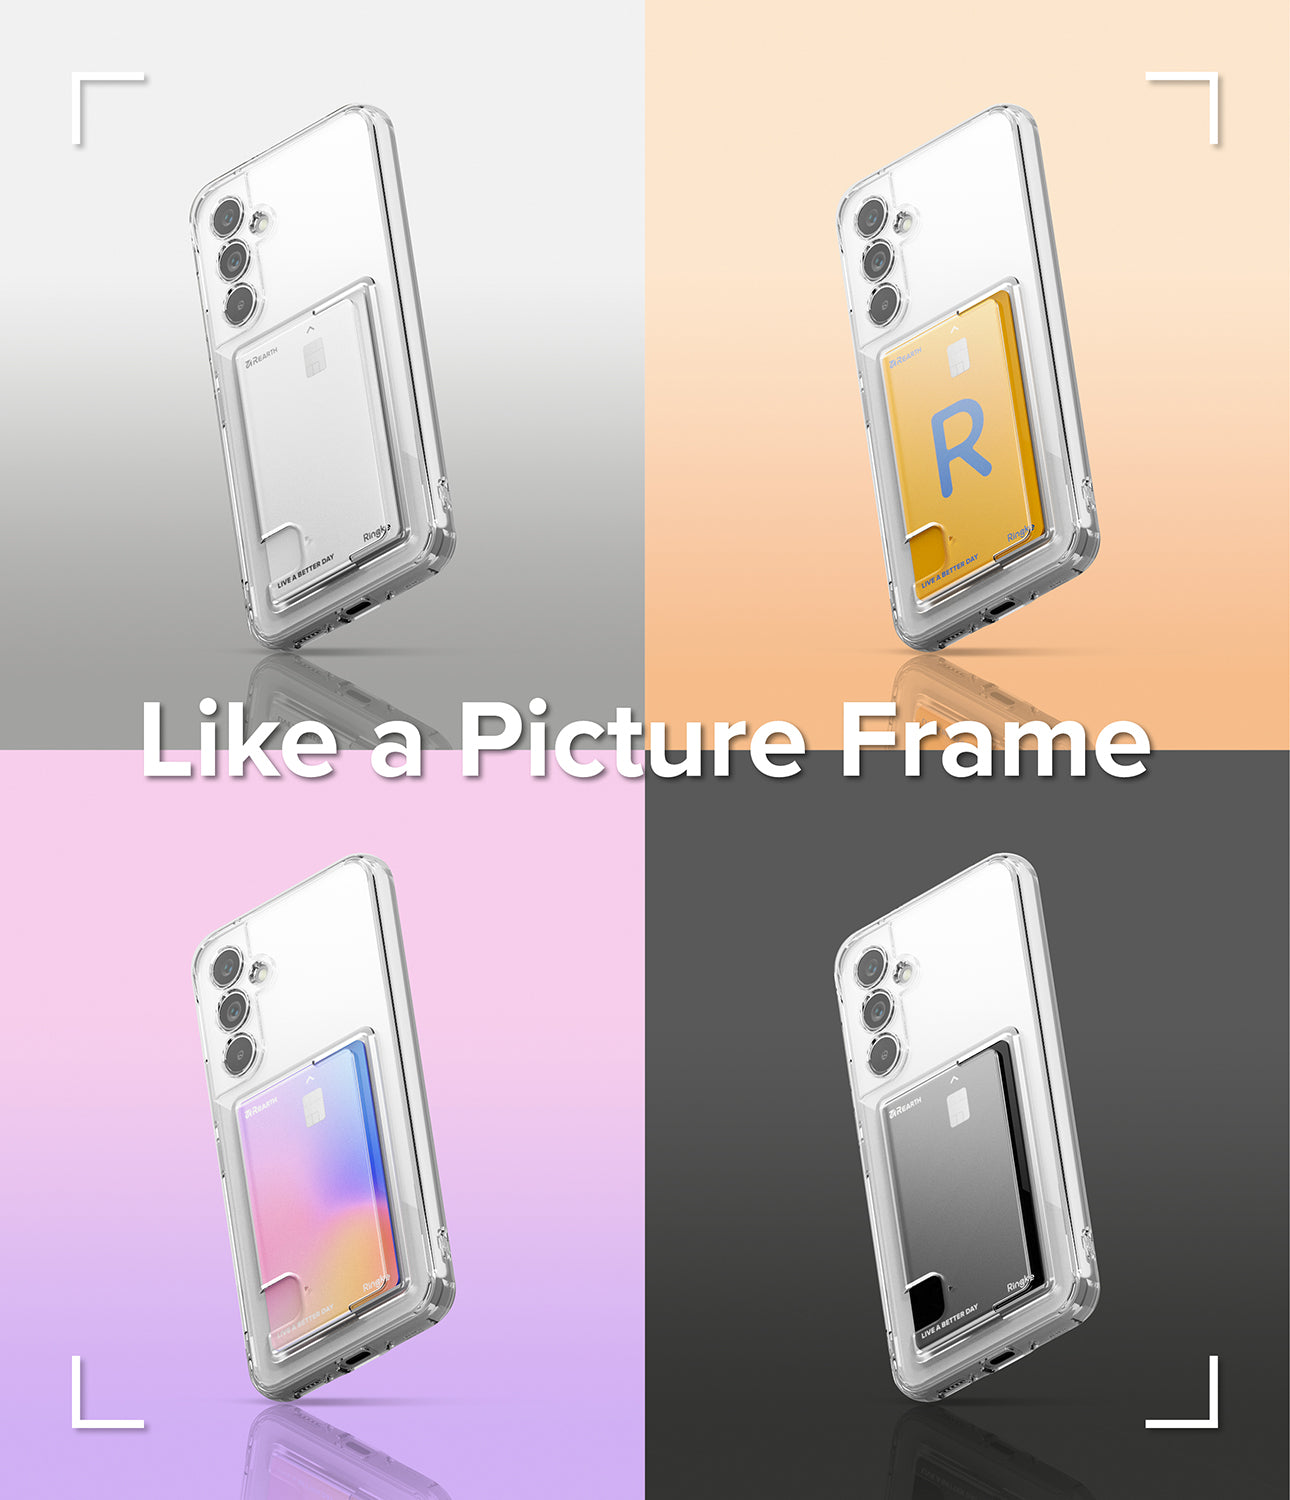 Like a picture frame